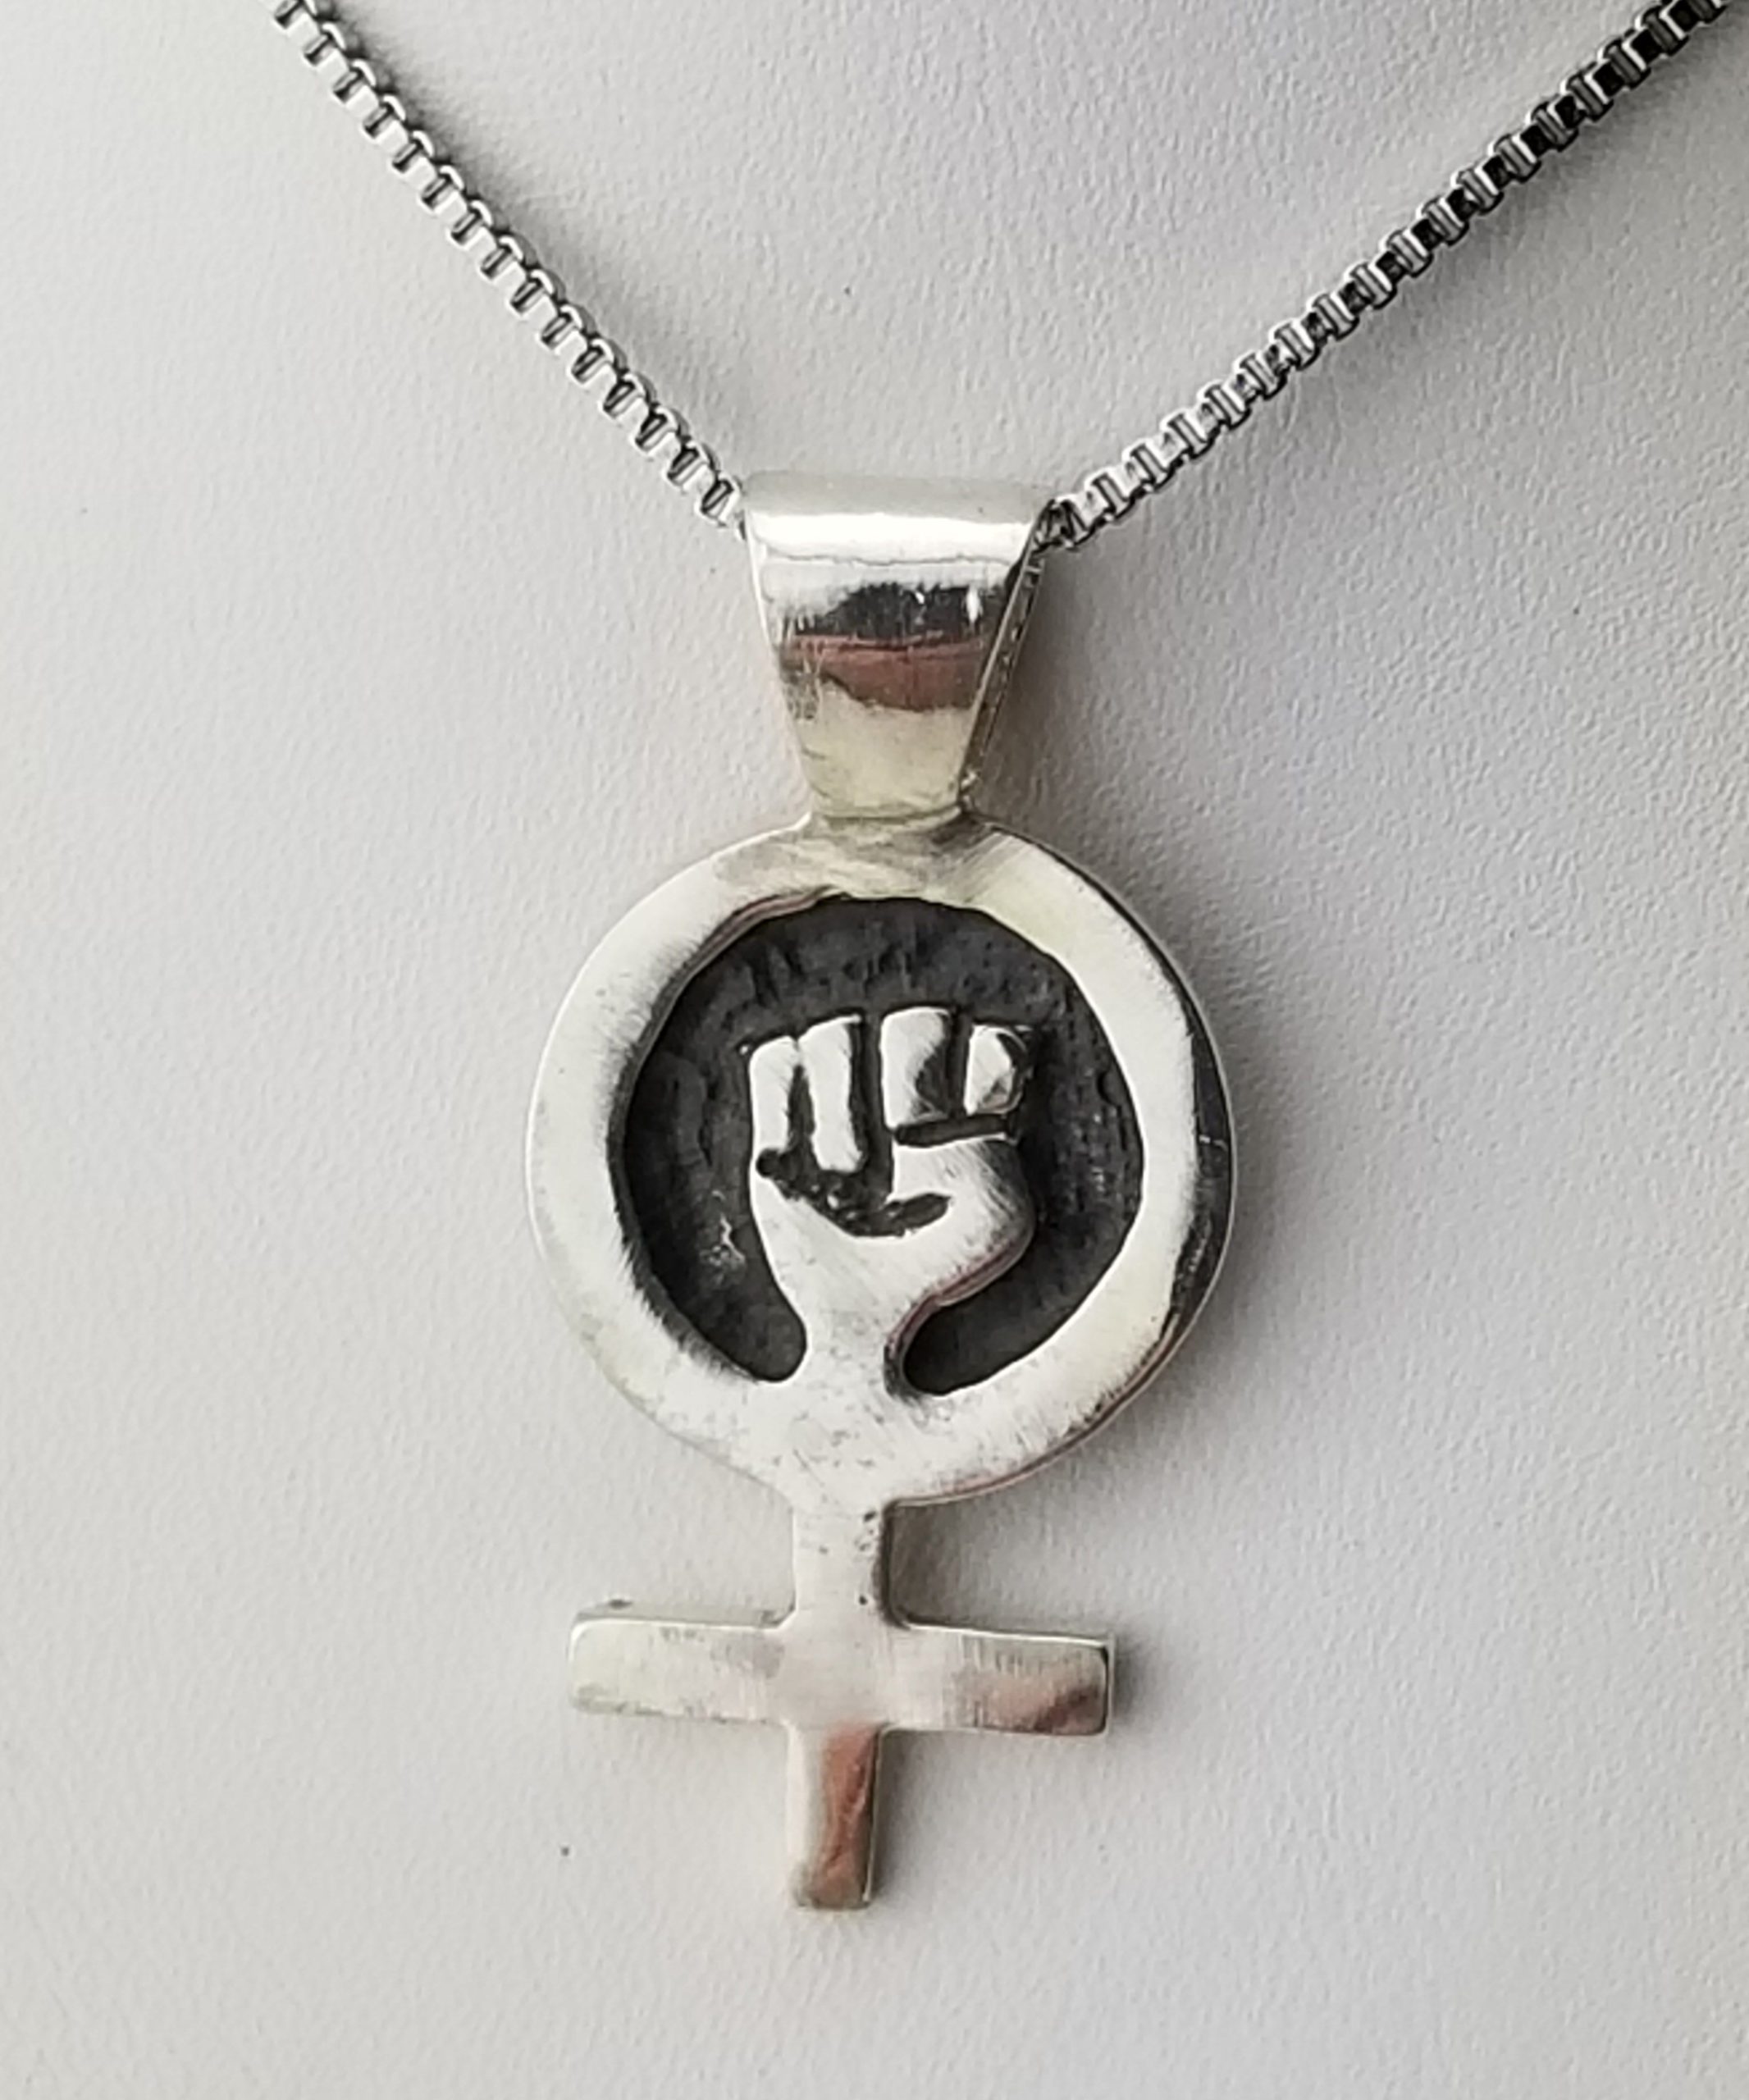 Handcrafted Artisan Jewelry sterling silver feminism pendant